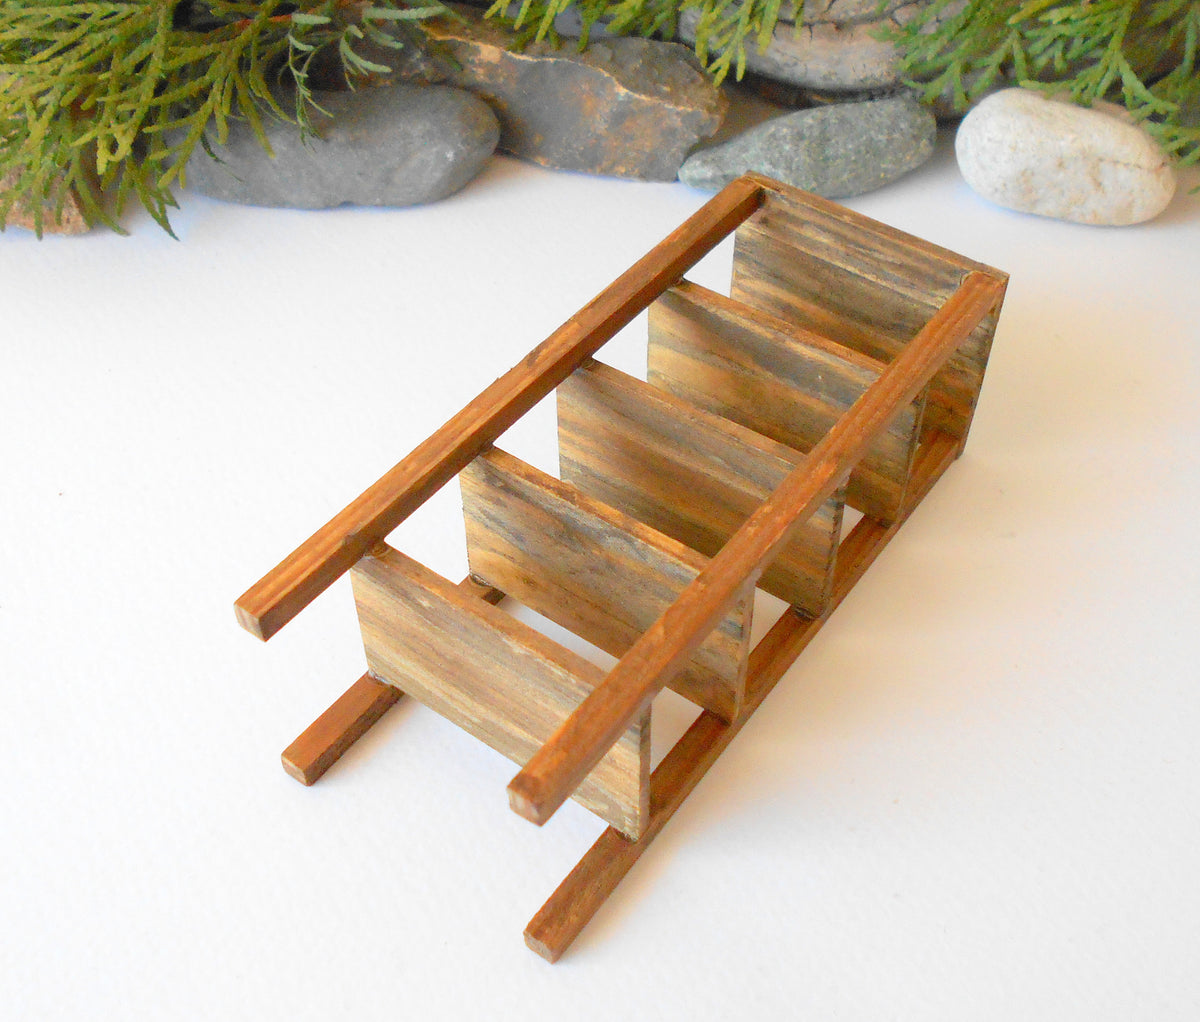 This is a Miniature shelf of wooden furniture that is approximately 1/12 in scale. I have stained the shelf with light brown Italian eco-friendly mordant.&amp;nbsp;